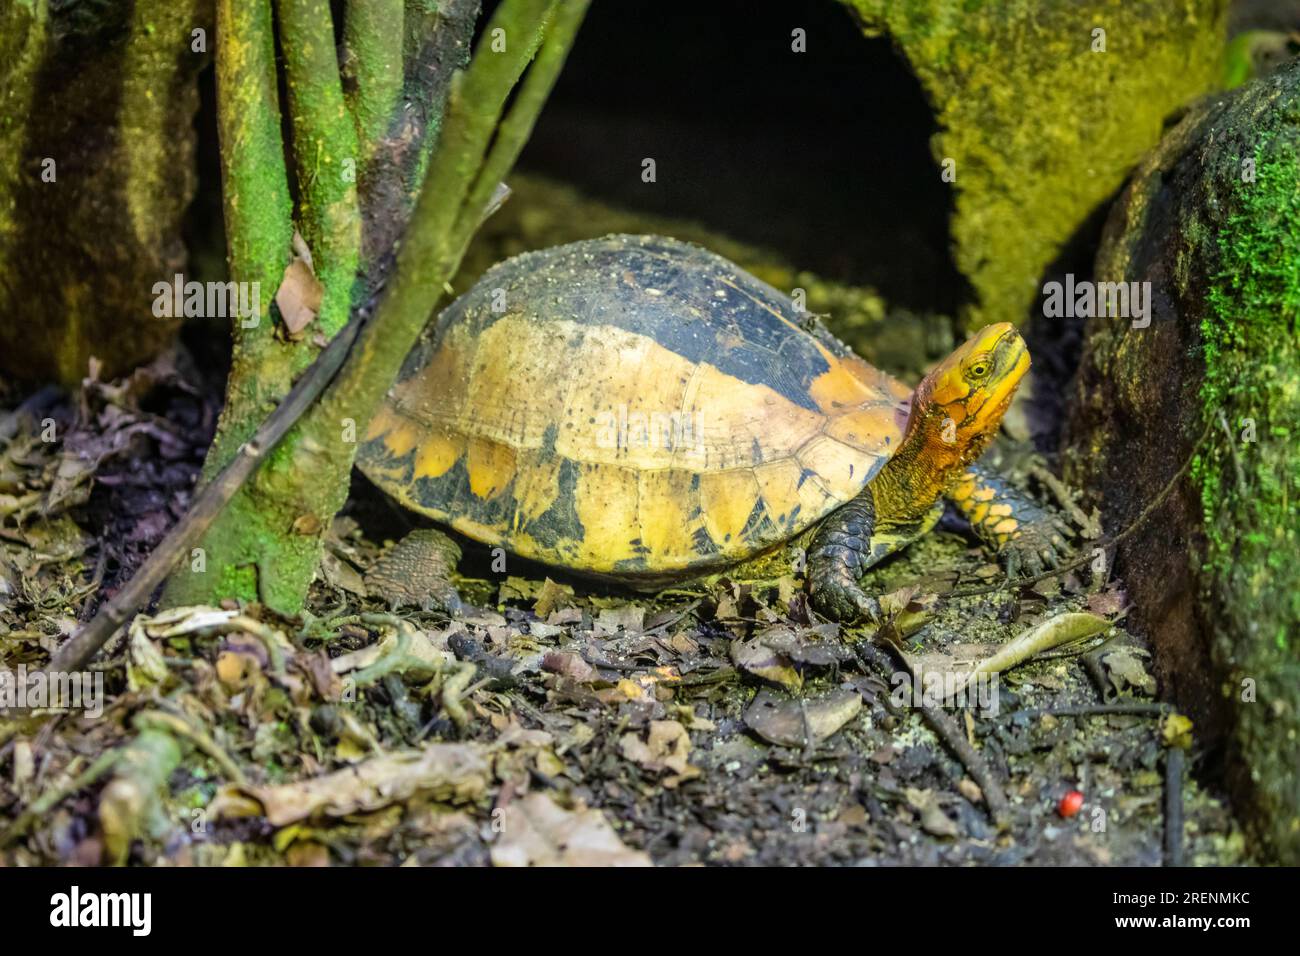 The Indochinese box turtle (Cuora galbinifrons) is a species of Asian box turtles from China, Vietnam, Laos, and possibly Cambodia. Stock Photo